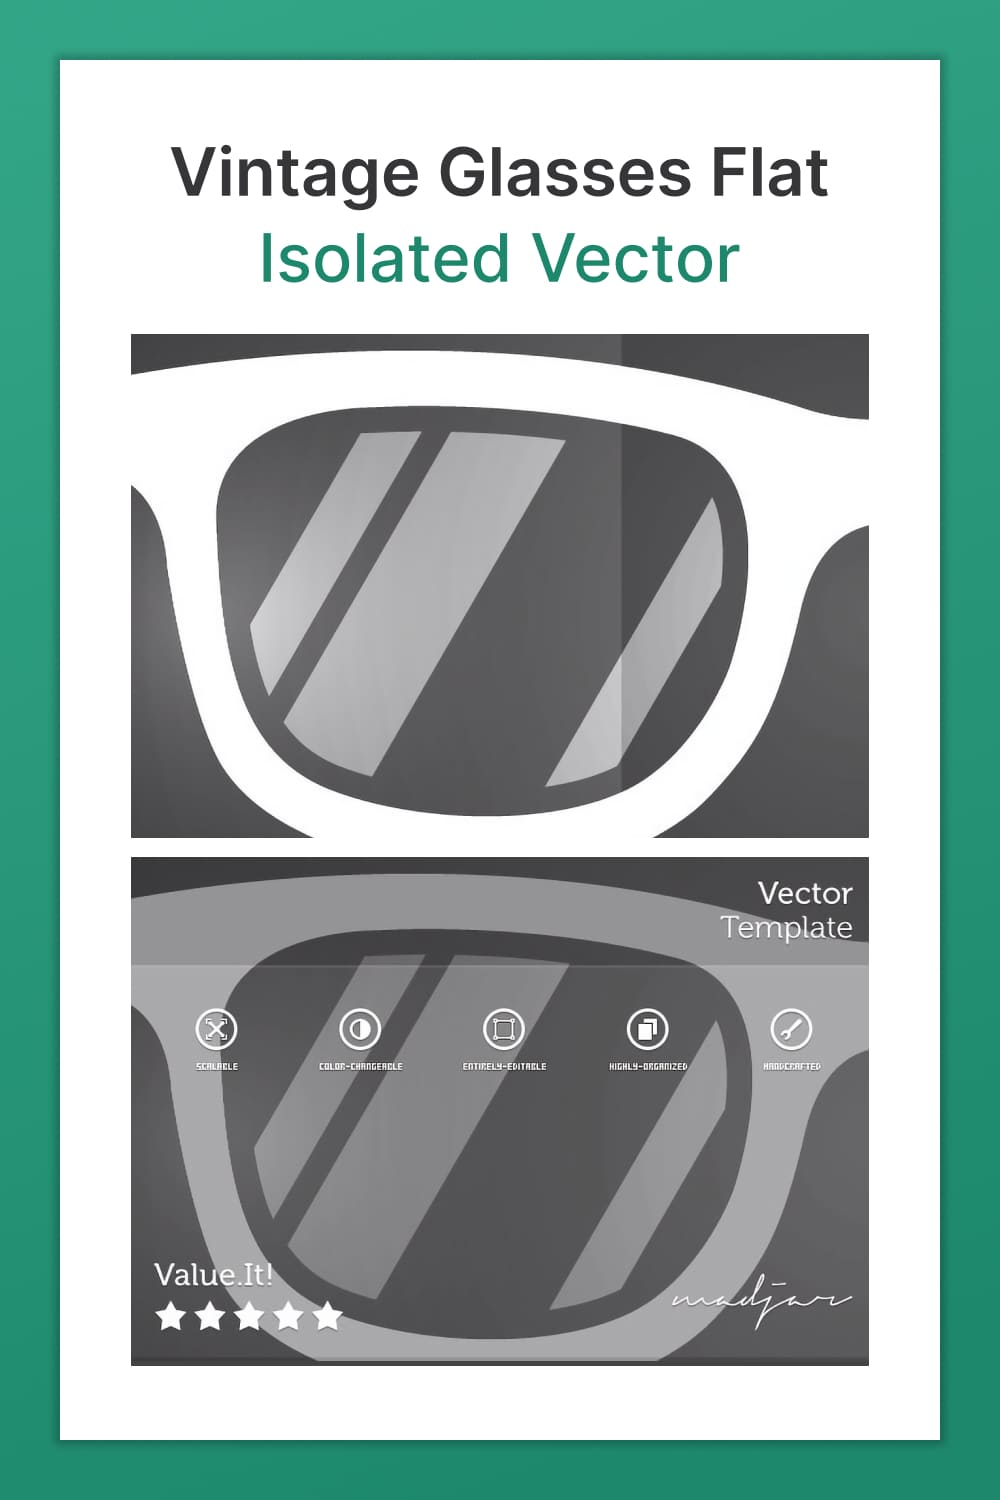 Vintage Glasses Flat Isolated Vector, image for pinterest.